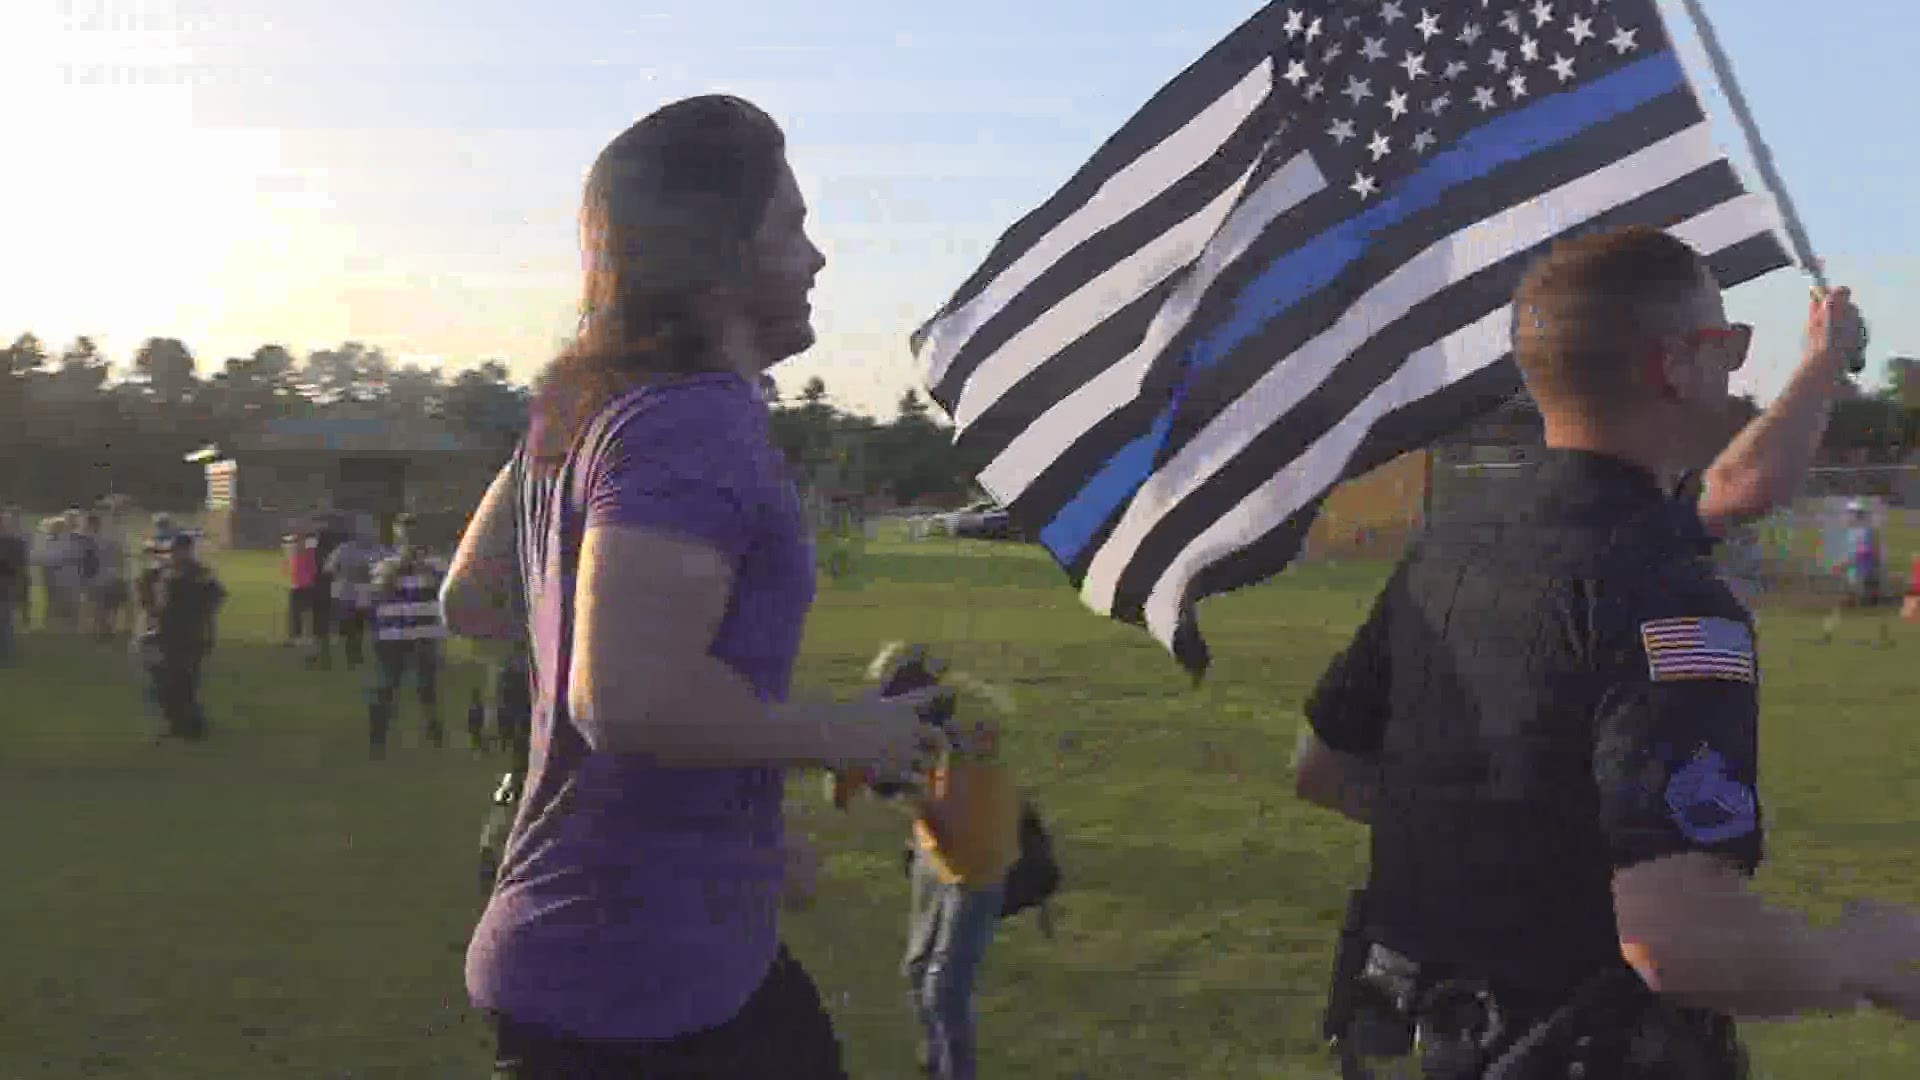 Officer Yarbrough Powell's husband joined about a dozen officers in running a mile to honor her life and memory